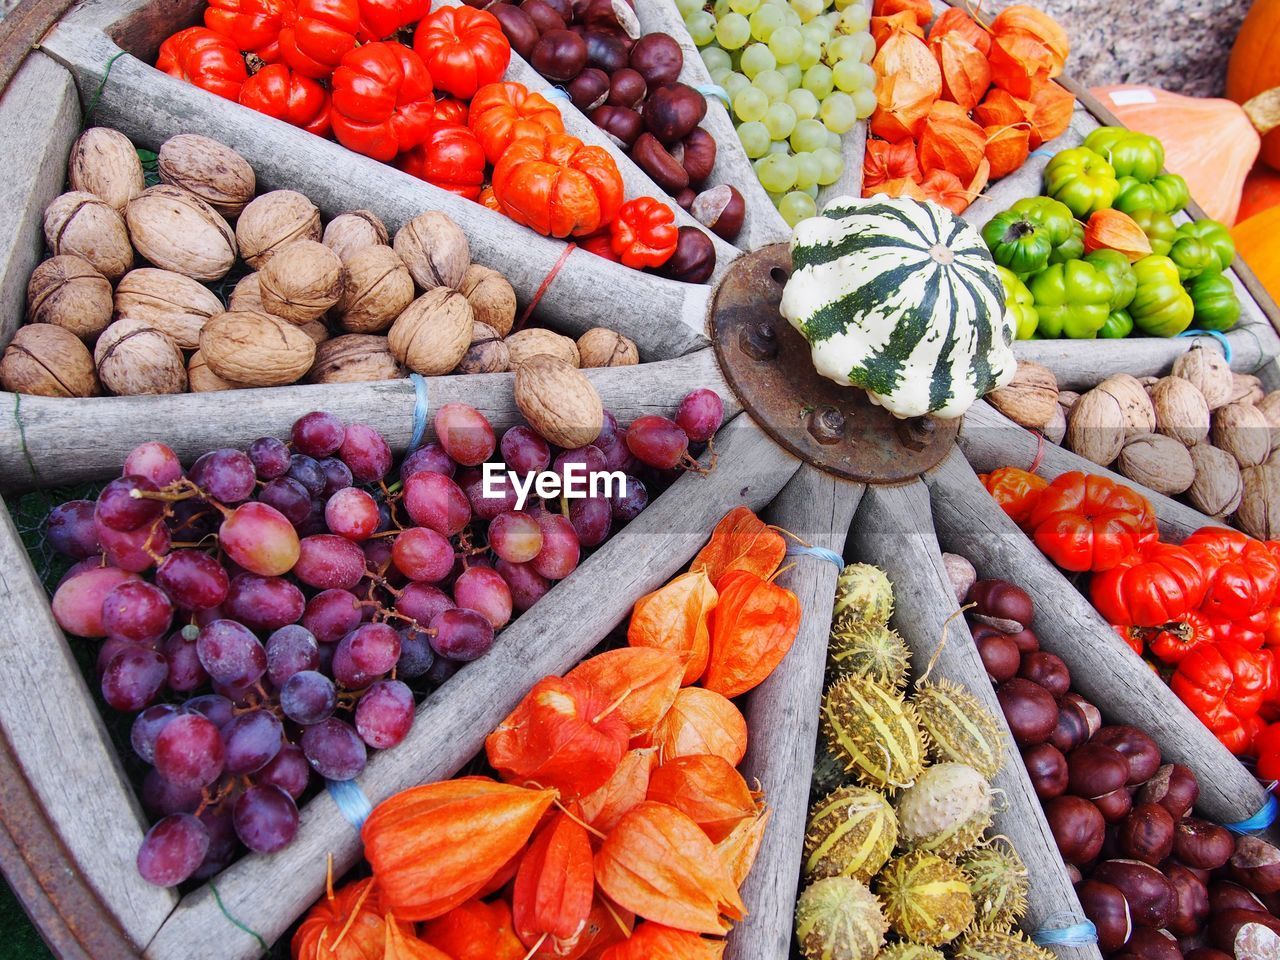 High angle view of fruits in market stall